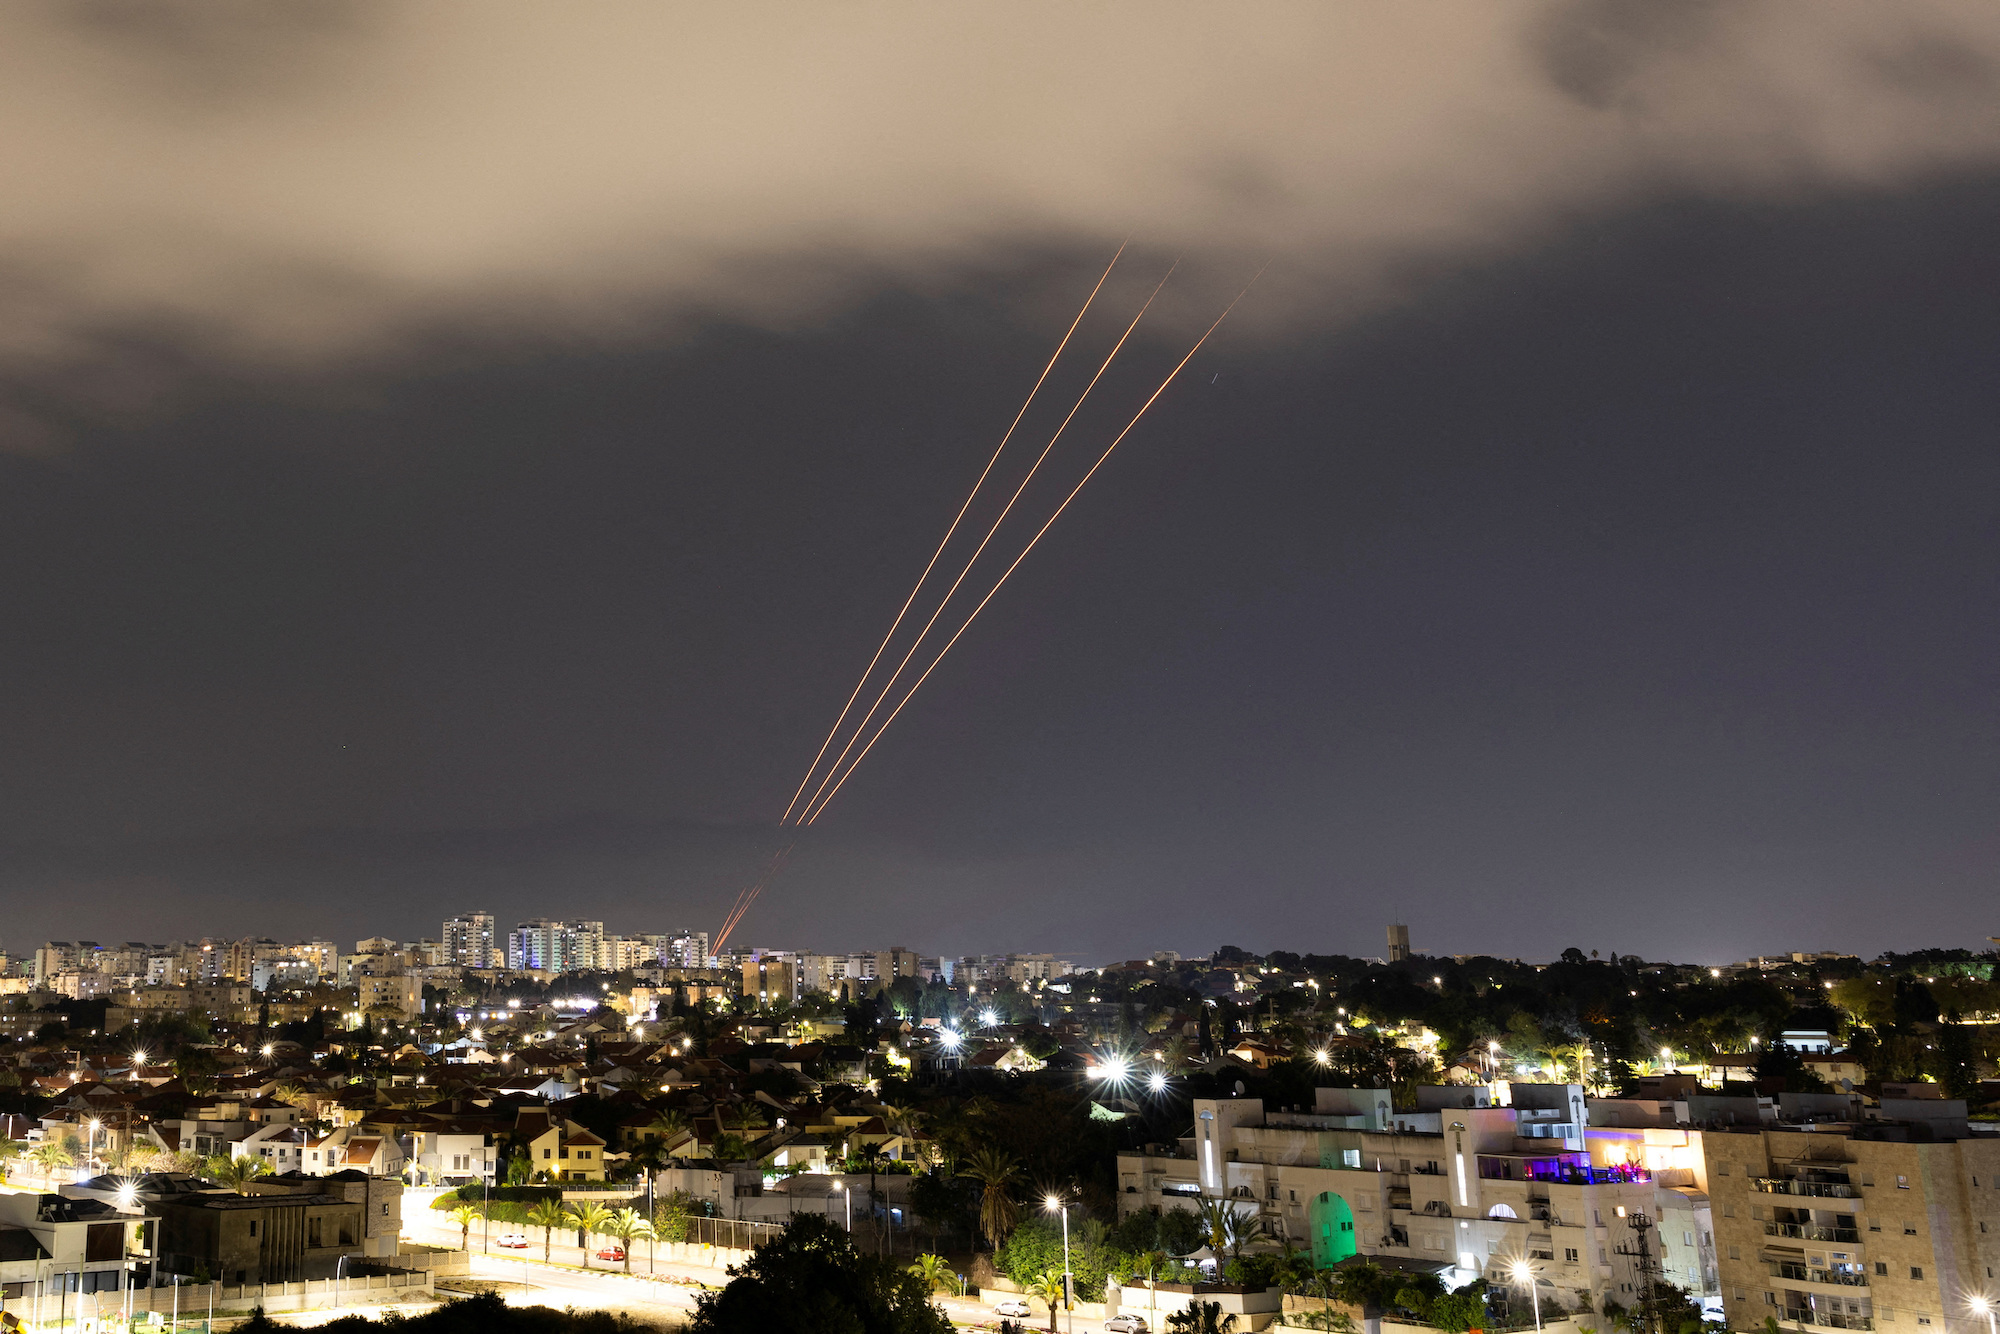 An anti-missile system operates as seen from Ashkelon, Israel, on Sunday.